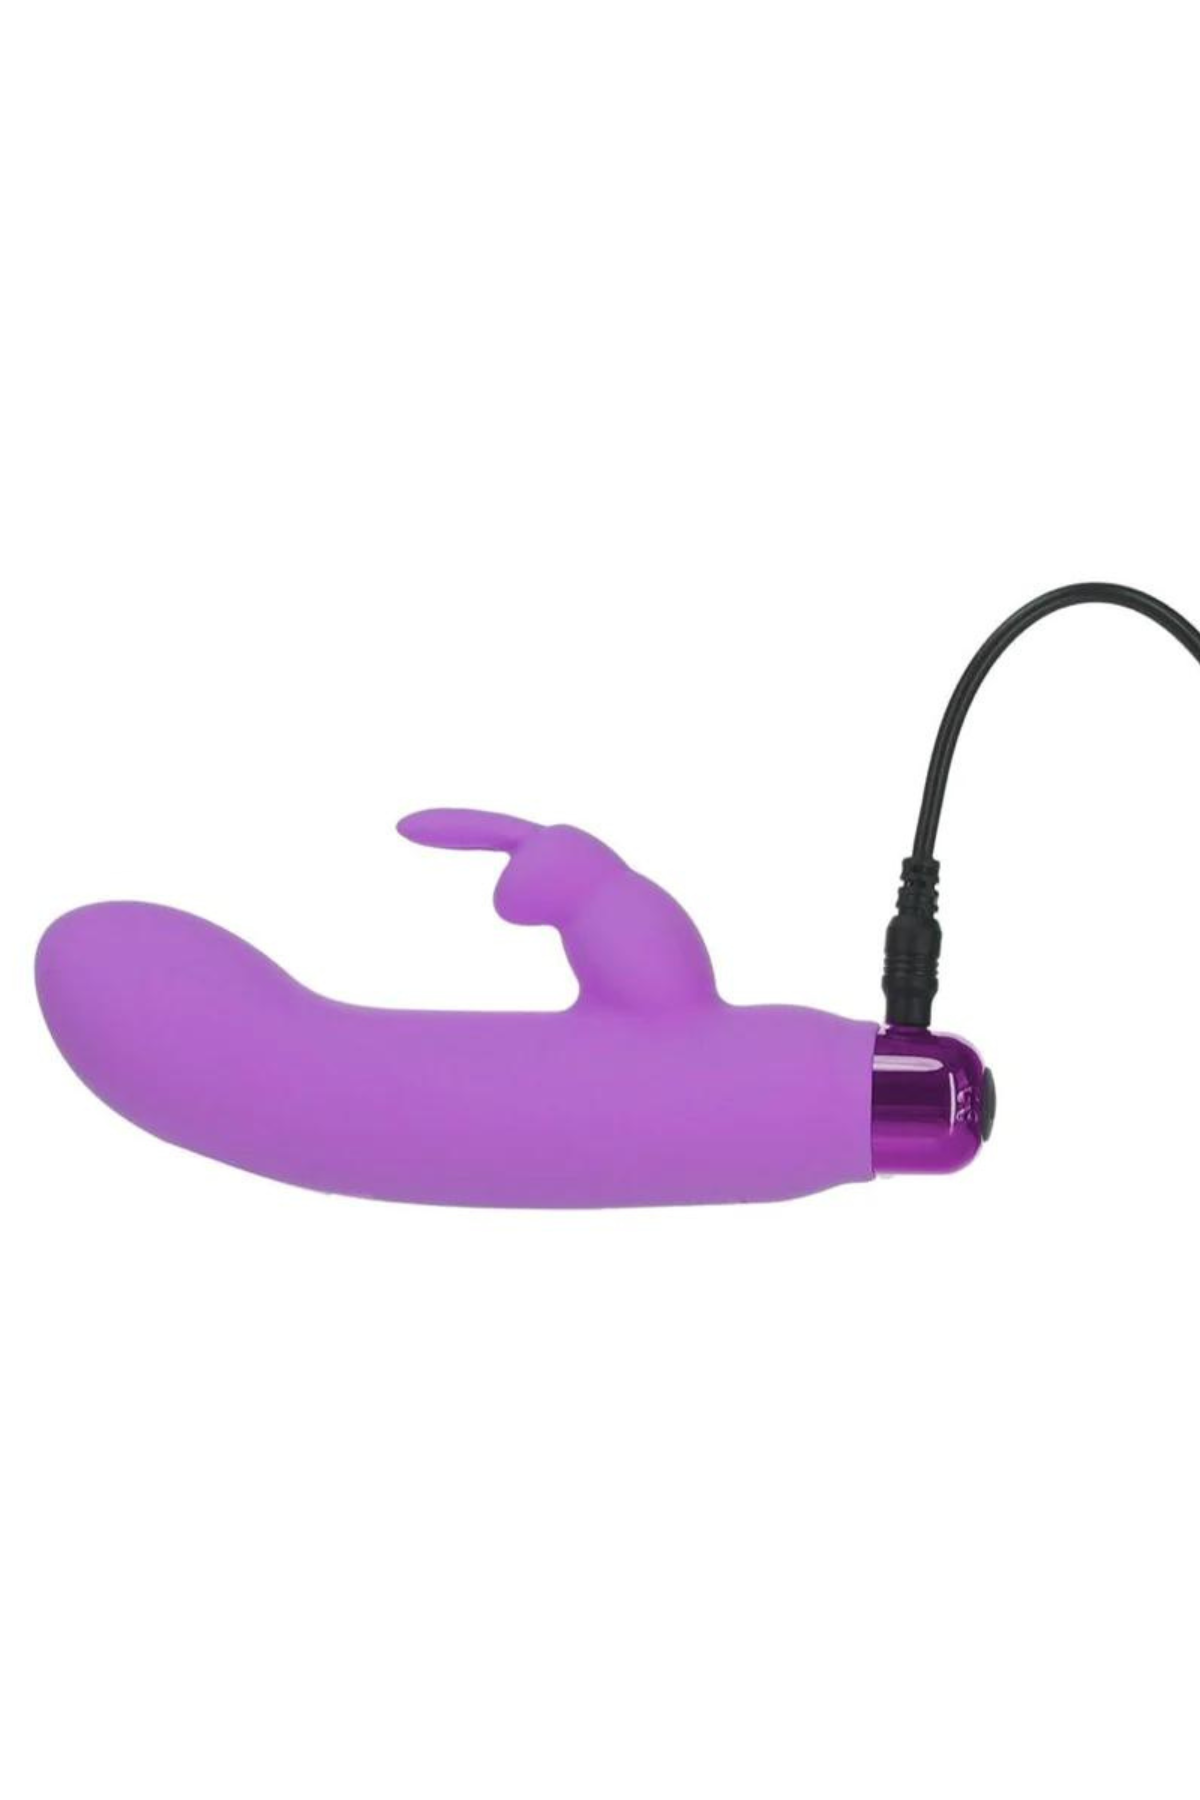 Swan Alice's Bunny Vibrator Charger